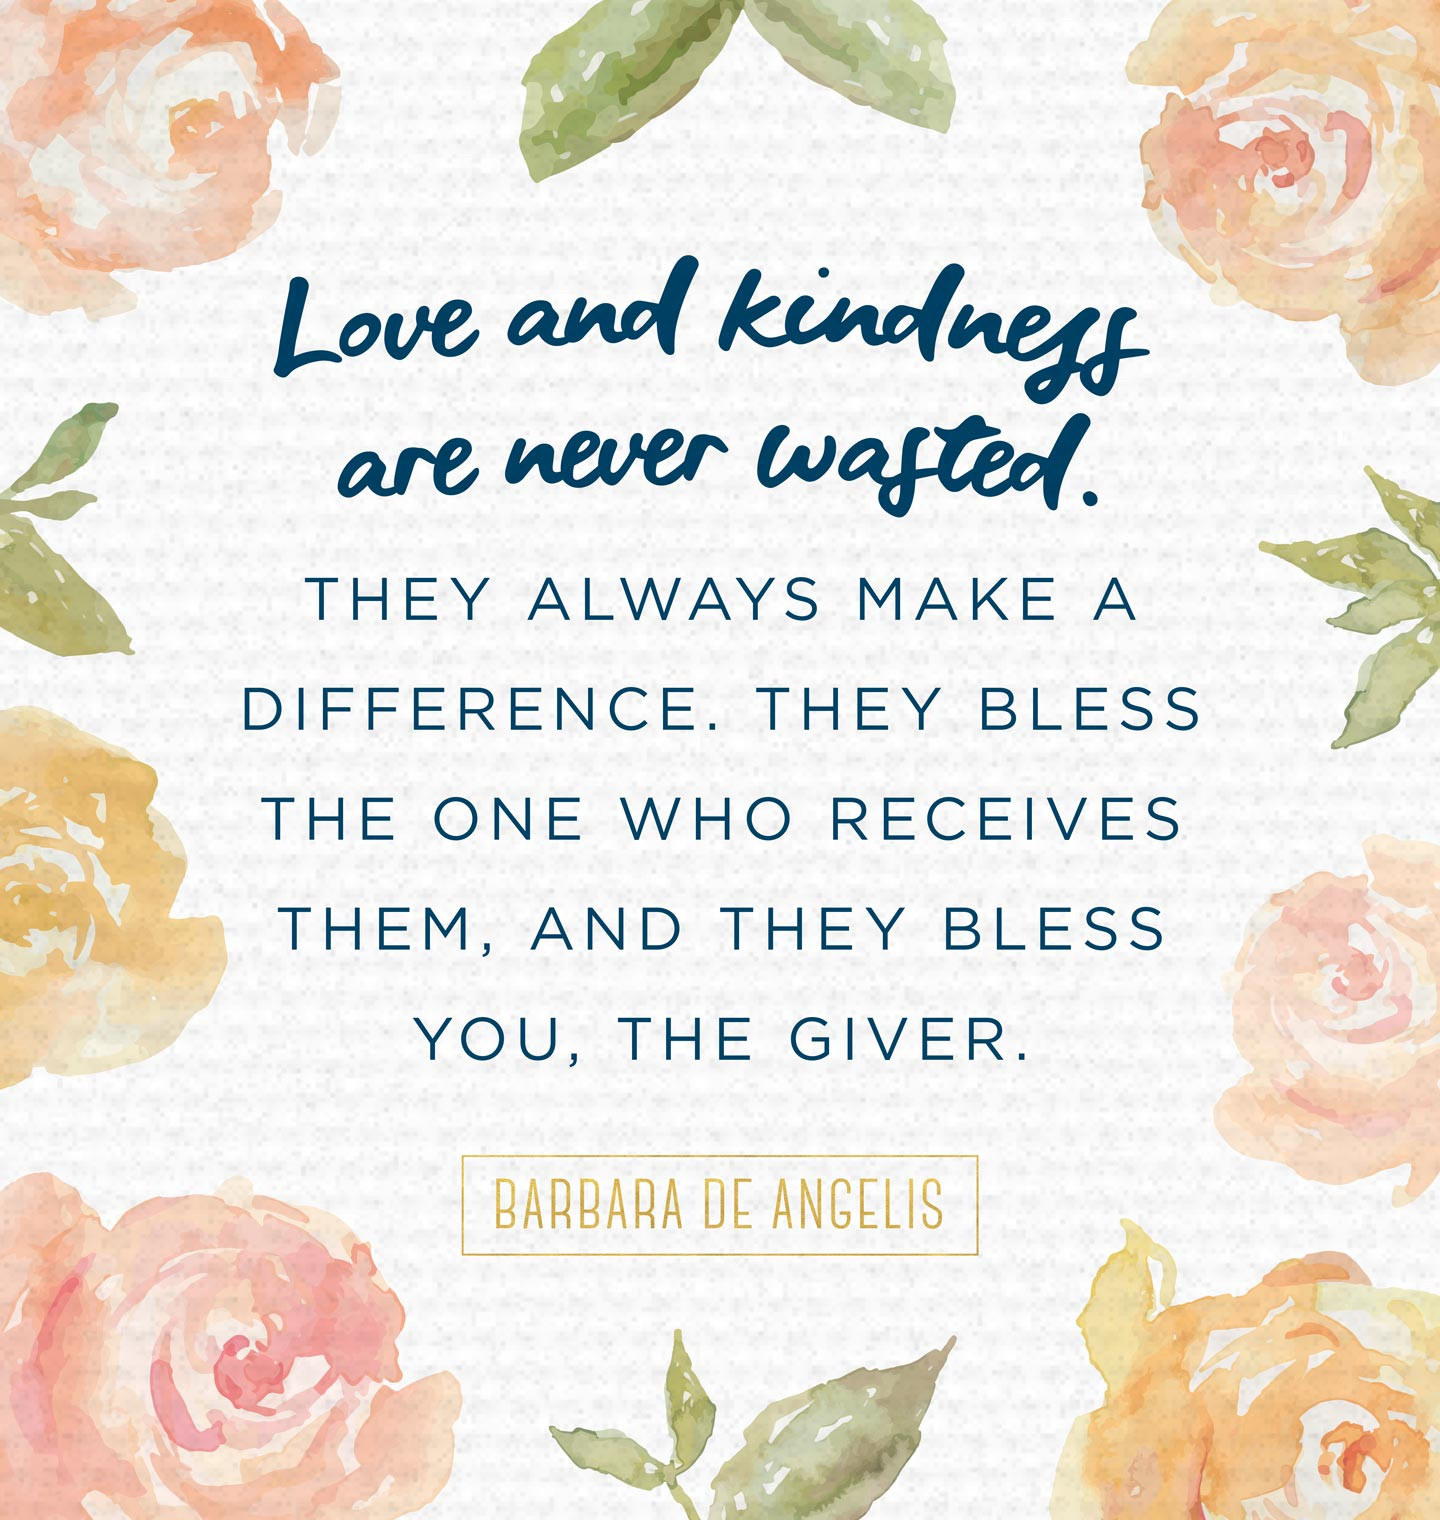 Quotes Of Kindness
 30 Inspiring Kindness Quotes That Will Enlighten You FTD